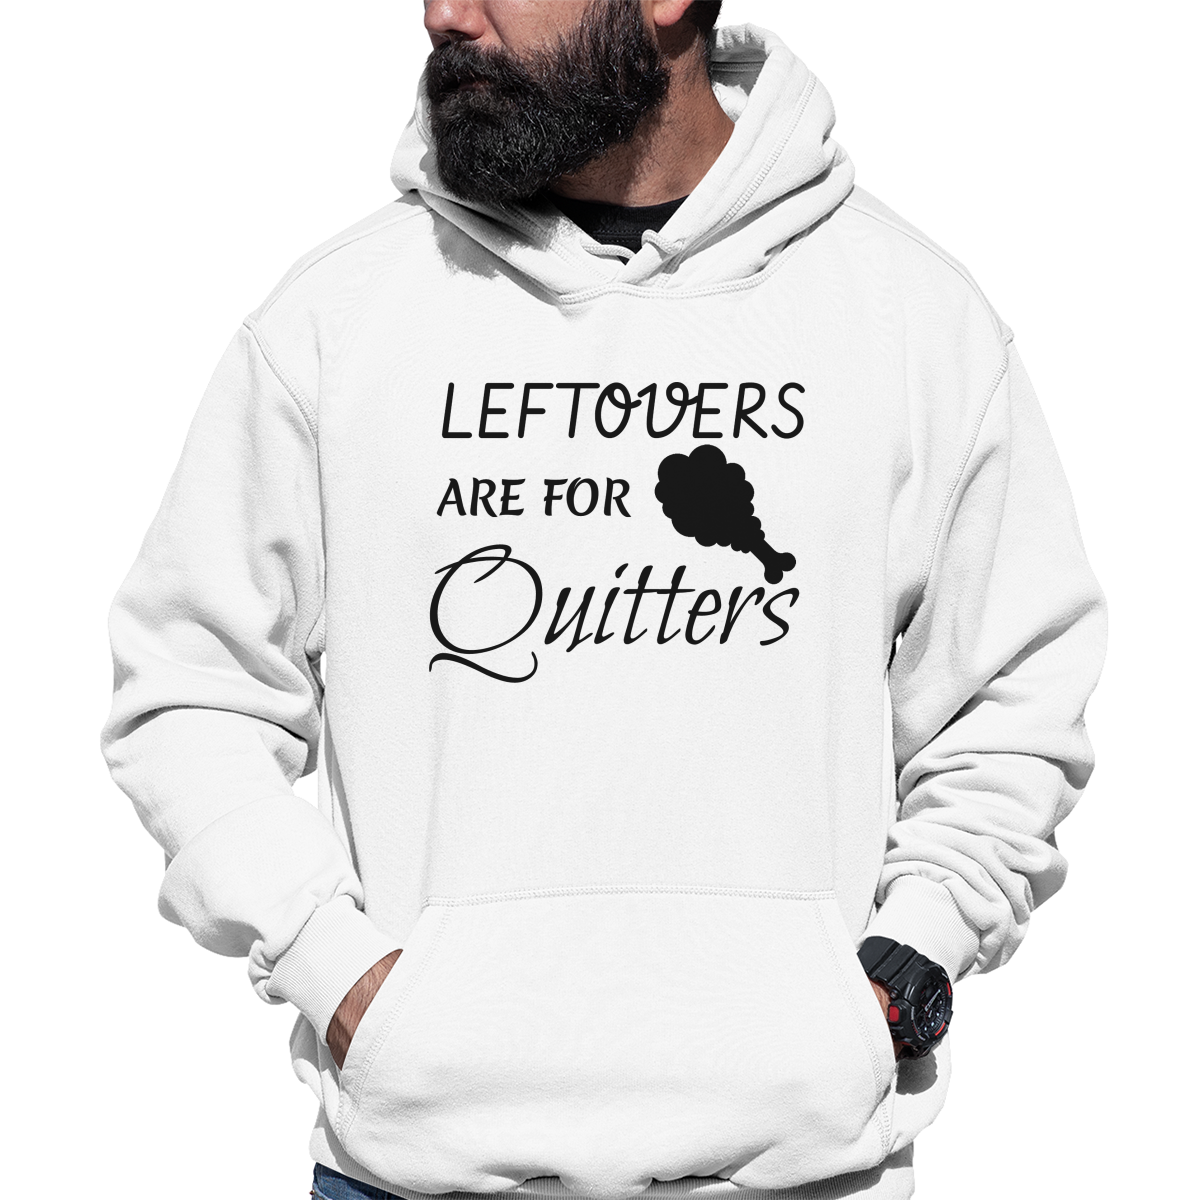 Leftovers Are For Quitters Unisex Hoodie | White